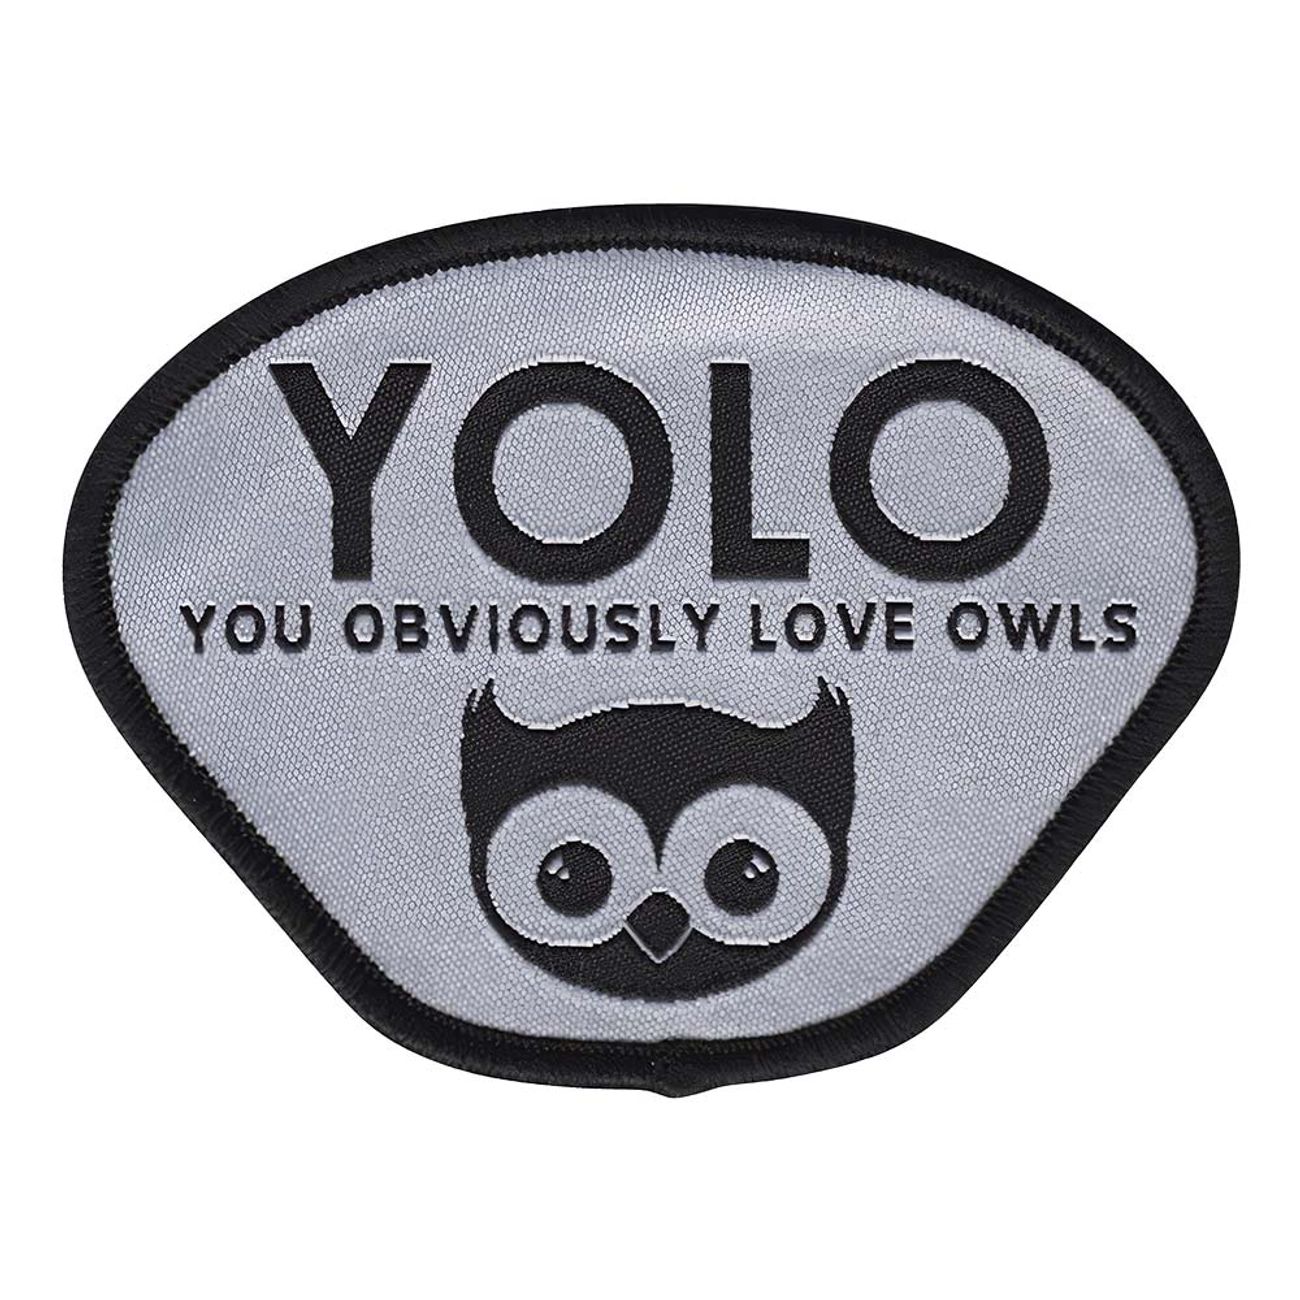 tygmarke-you-obviously-love-owls-94414-2